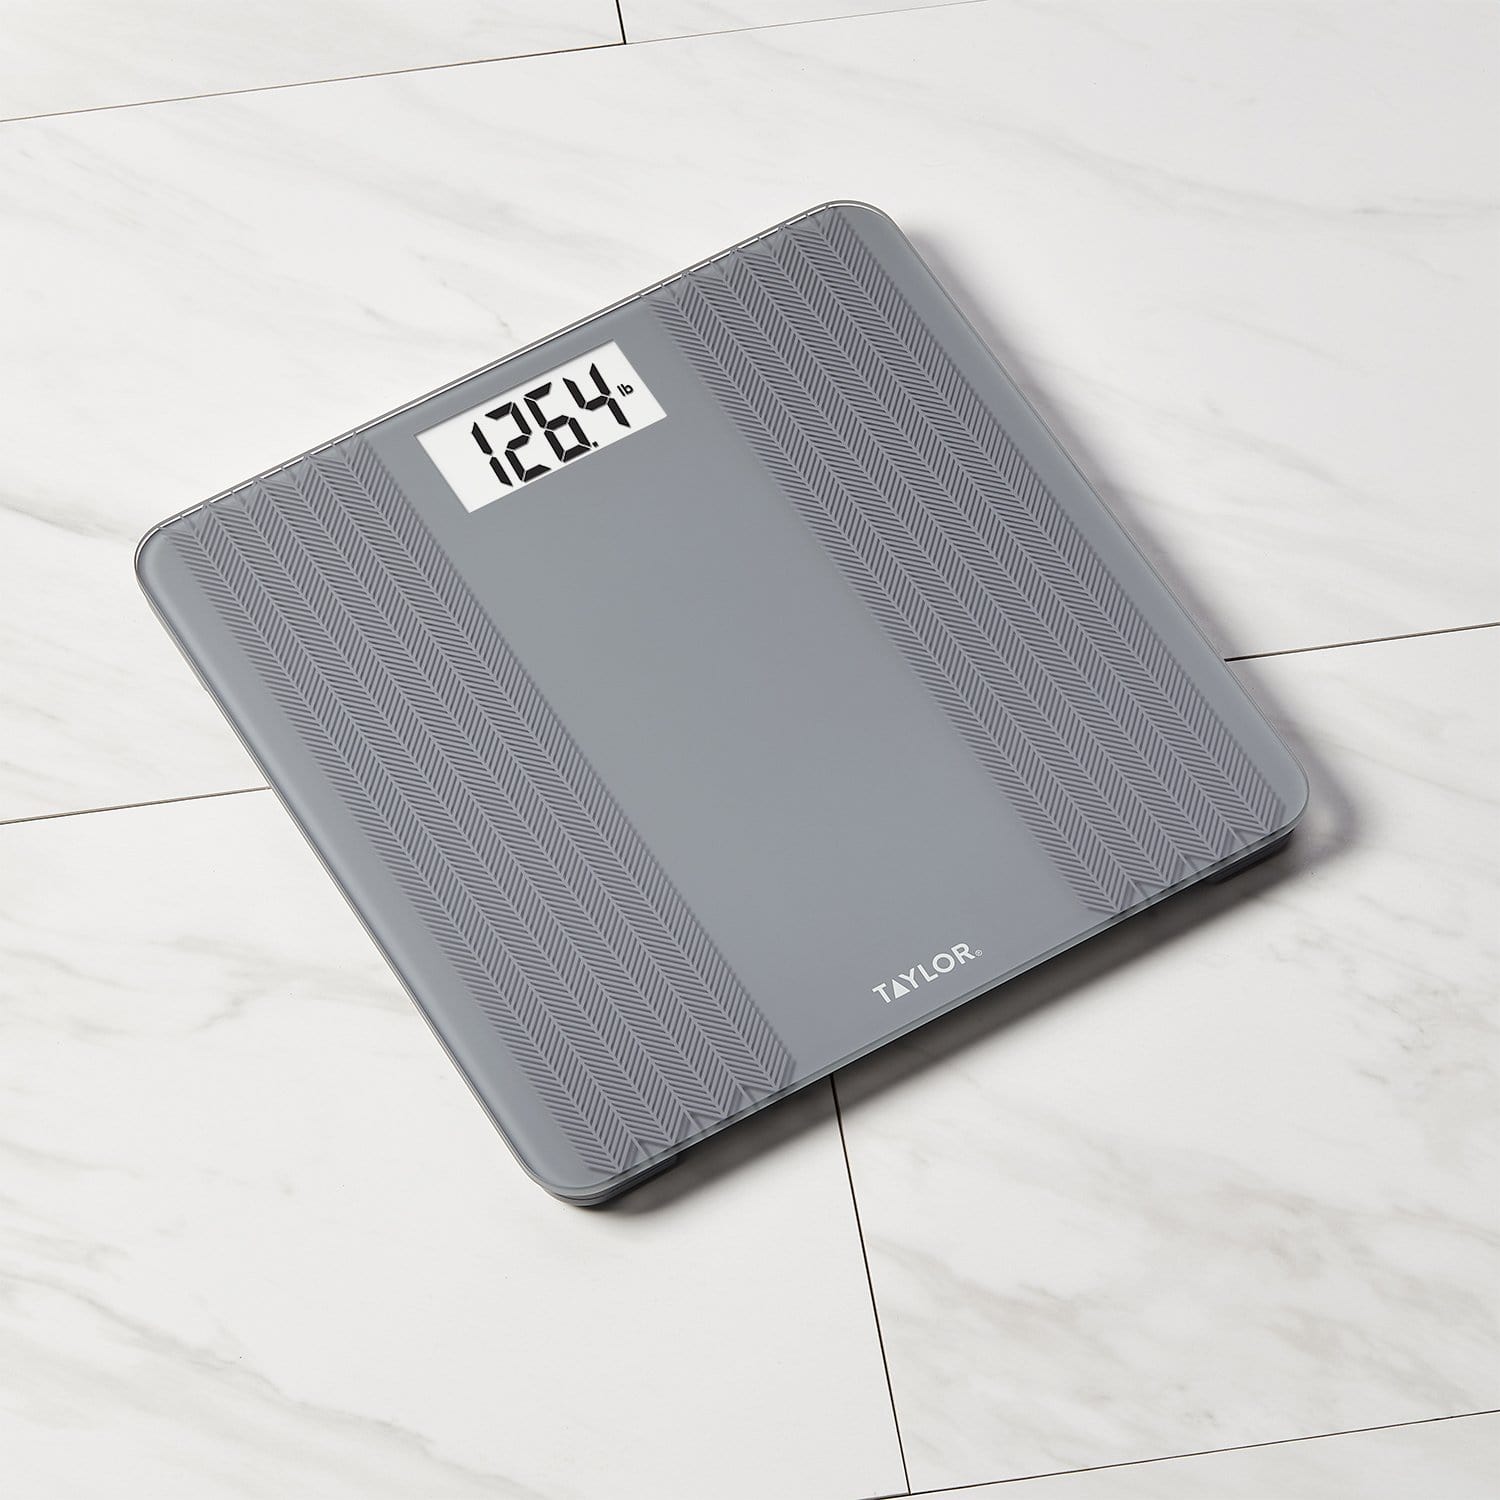 Taylor® Precision Products Digital Glass Scale With Textured Herringbone  Design, 500-lb. Capacity : Target